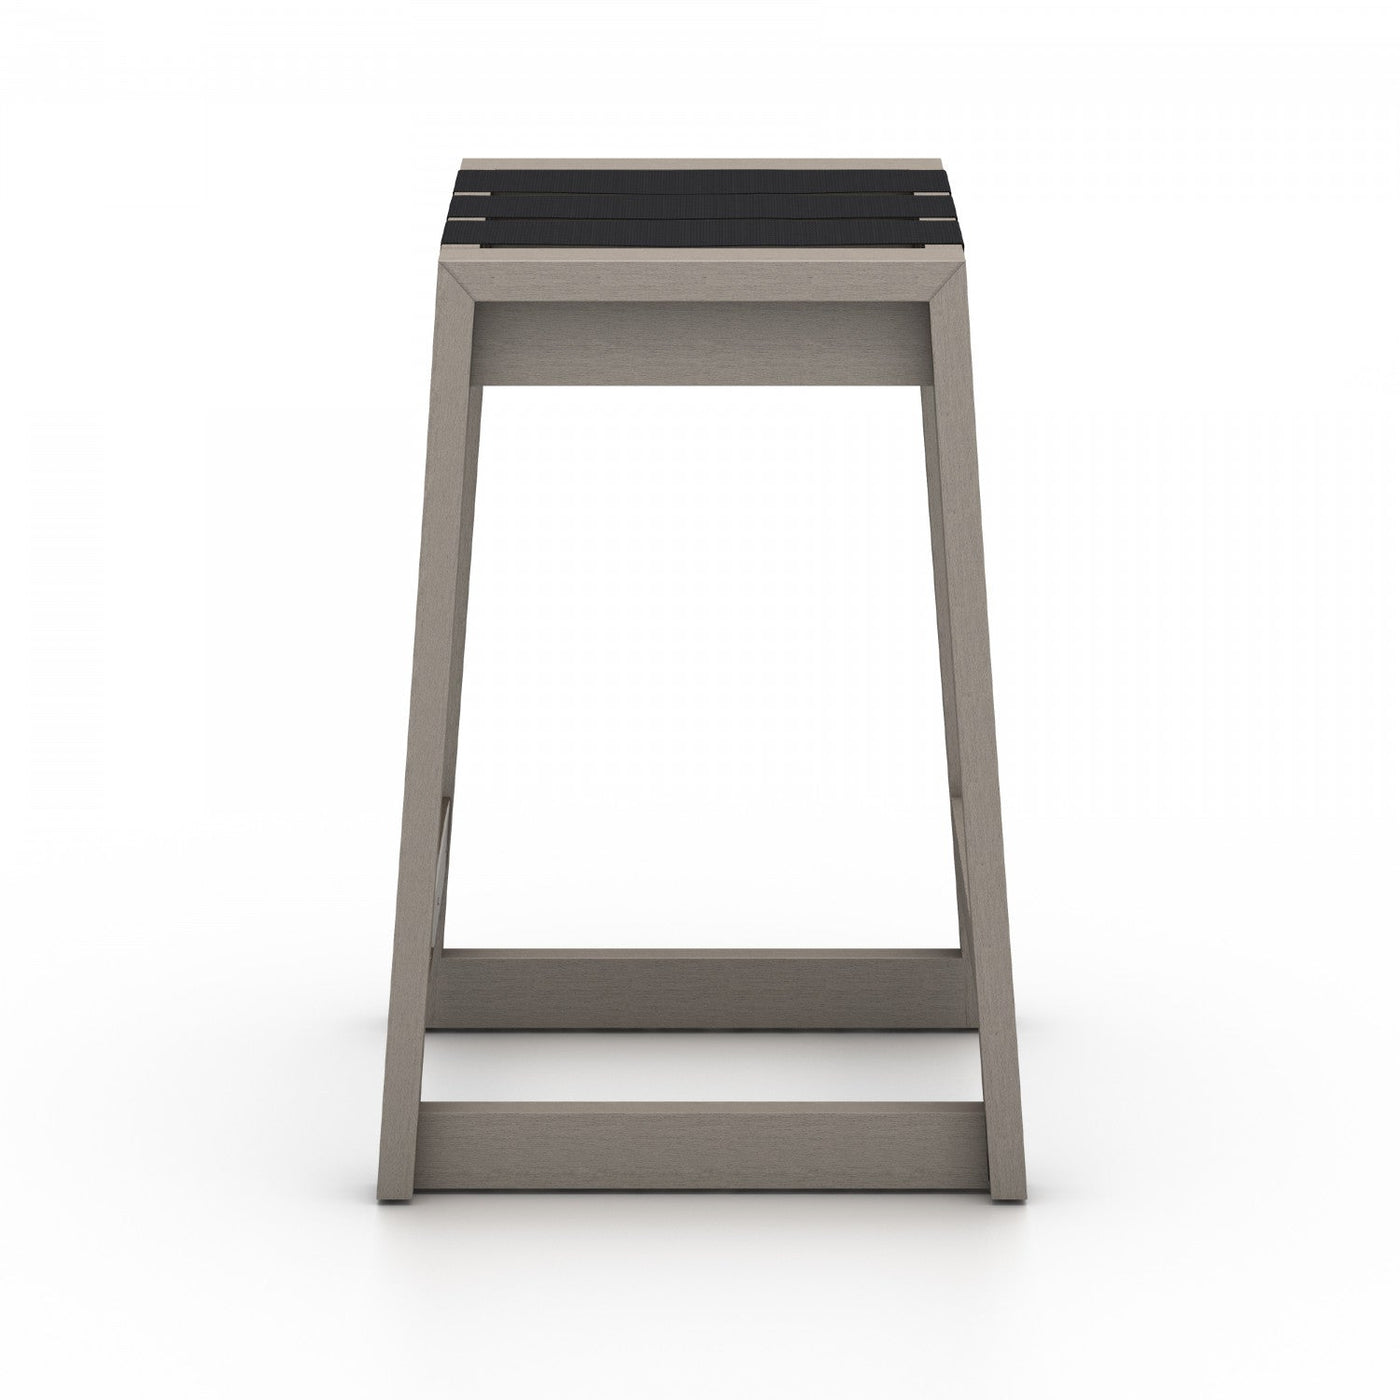 SONOMA OUTDOOR COUNTER STOOL, WEATHERED GREY